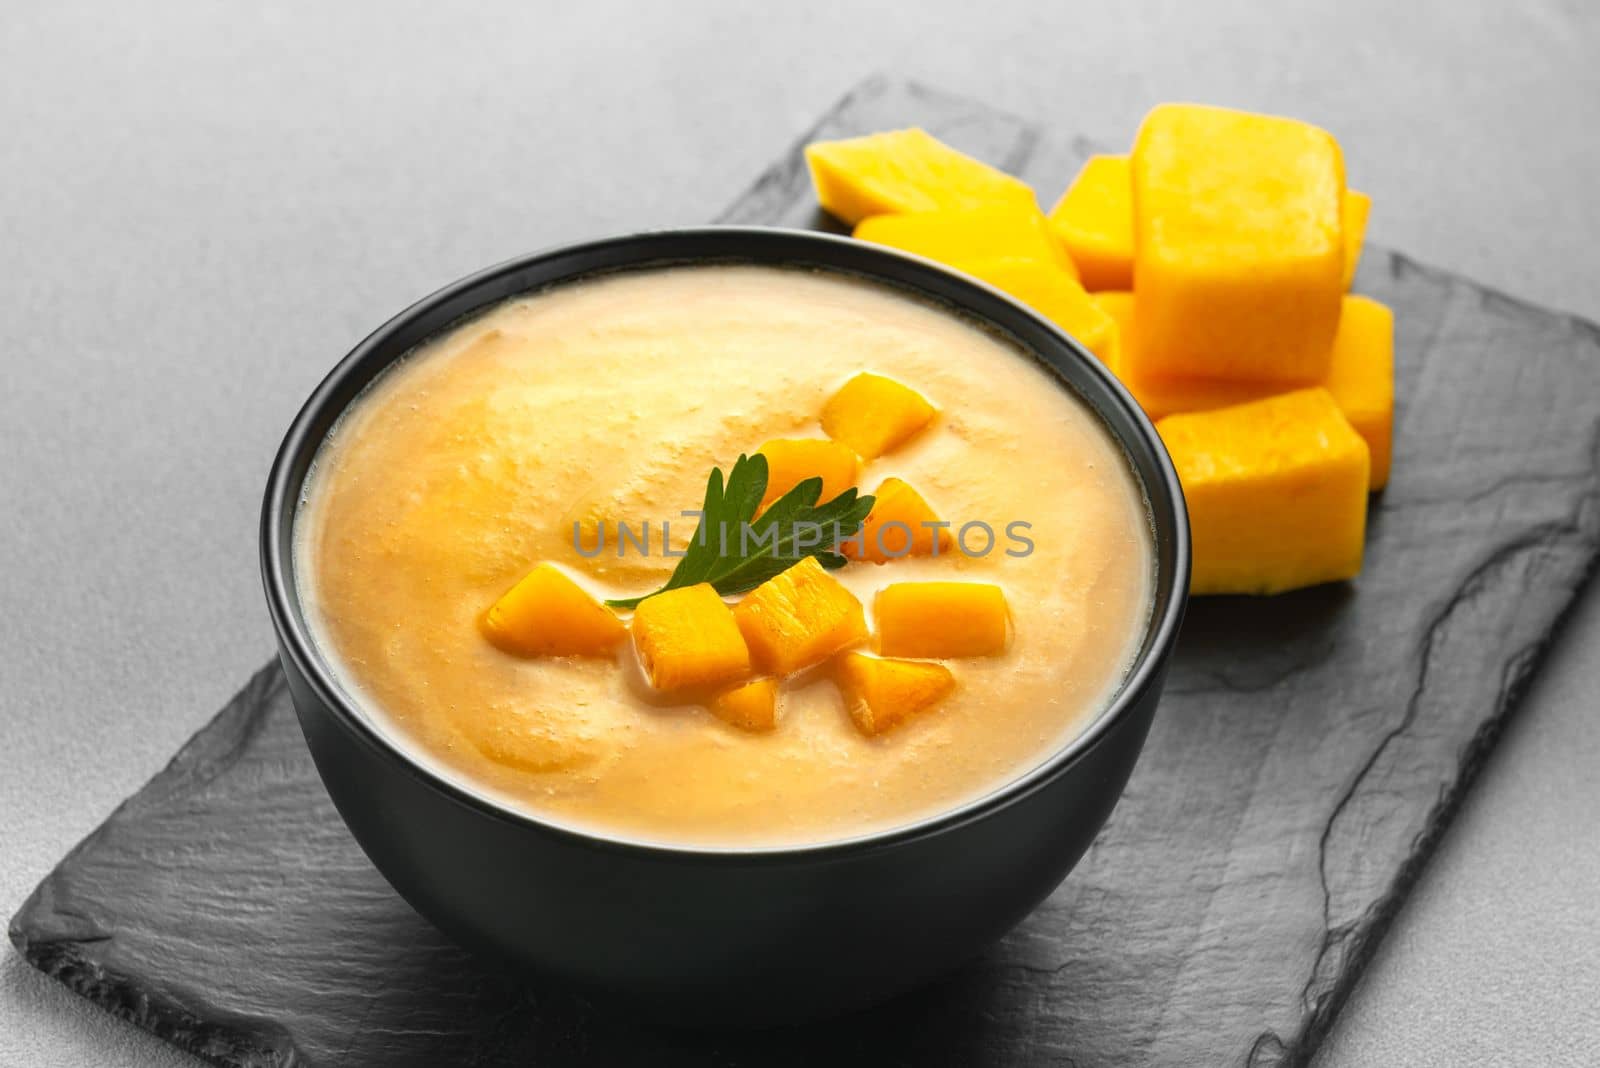 pumpkin cream soup mashed potatoes on a gray background. Vegan curried pumpkin lentil soup puree in a bowl. Space for text. Pescatarian Eating, Flexitarian Eating, Reducetarian Eating. by gulyaevstudio